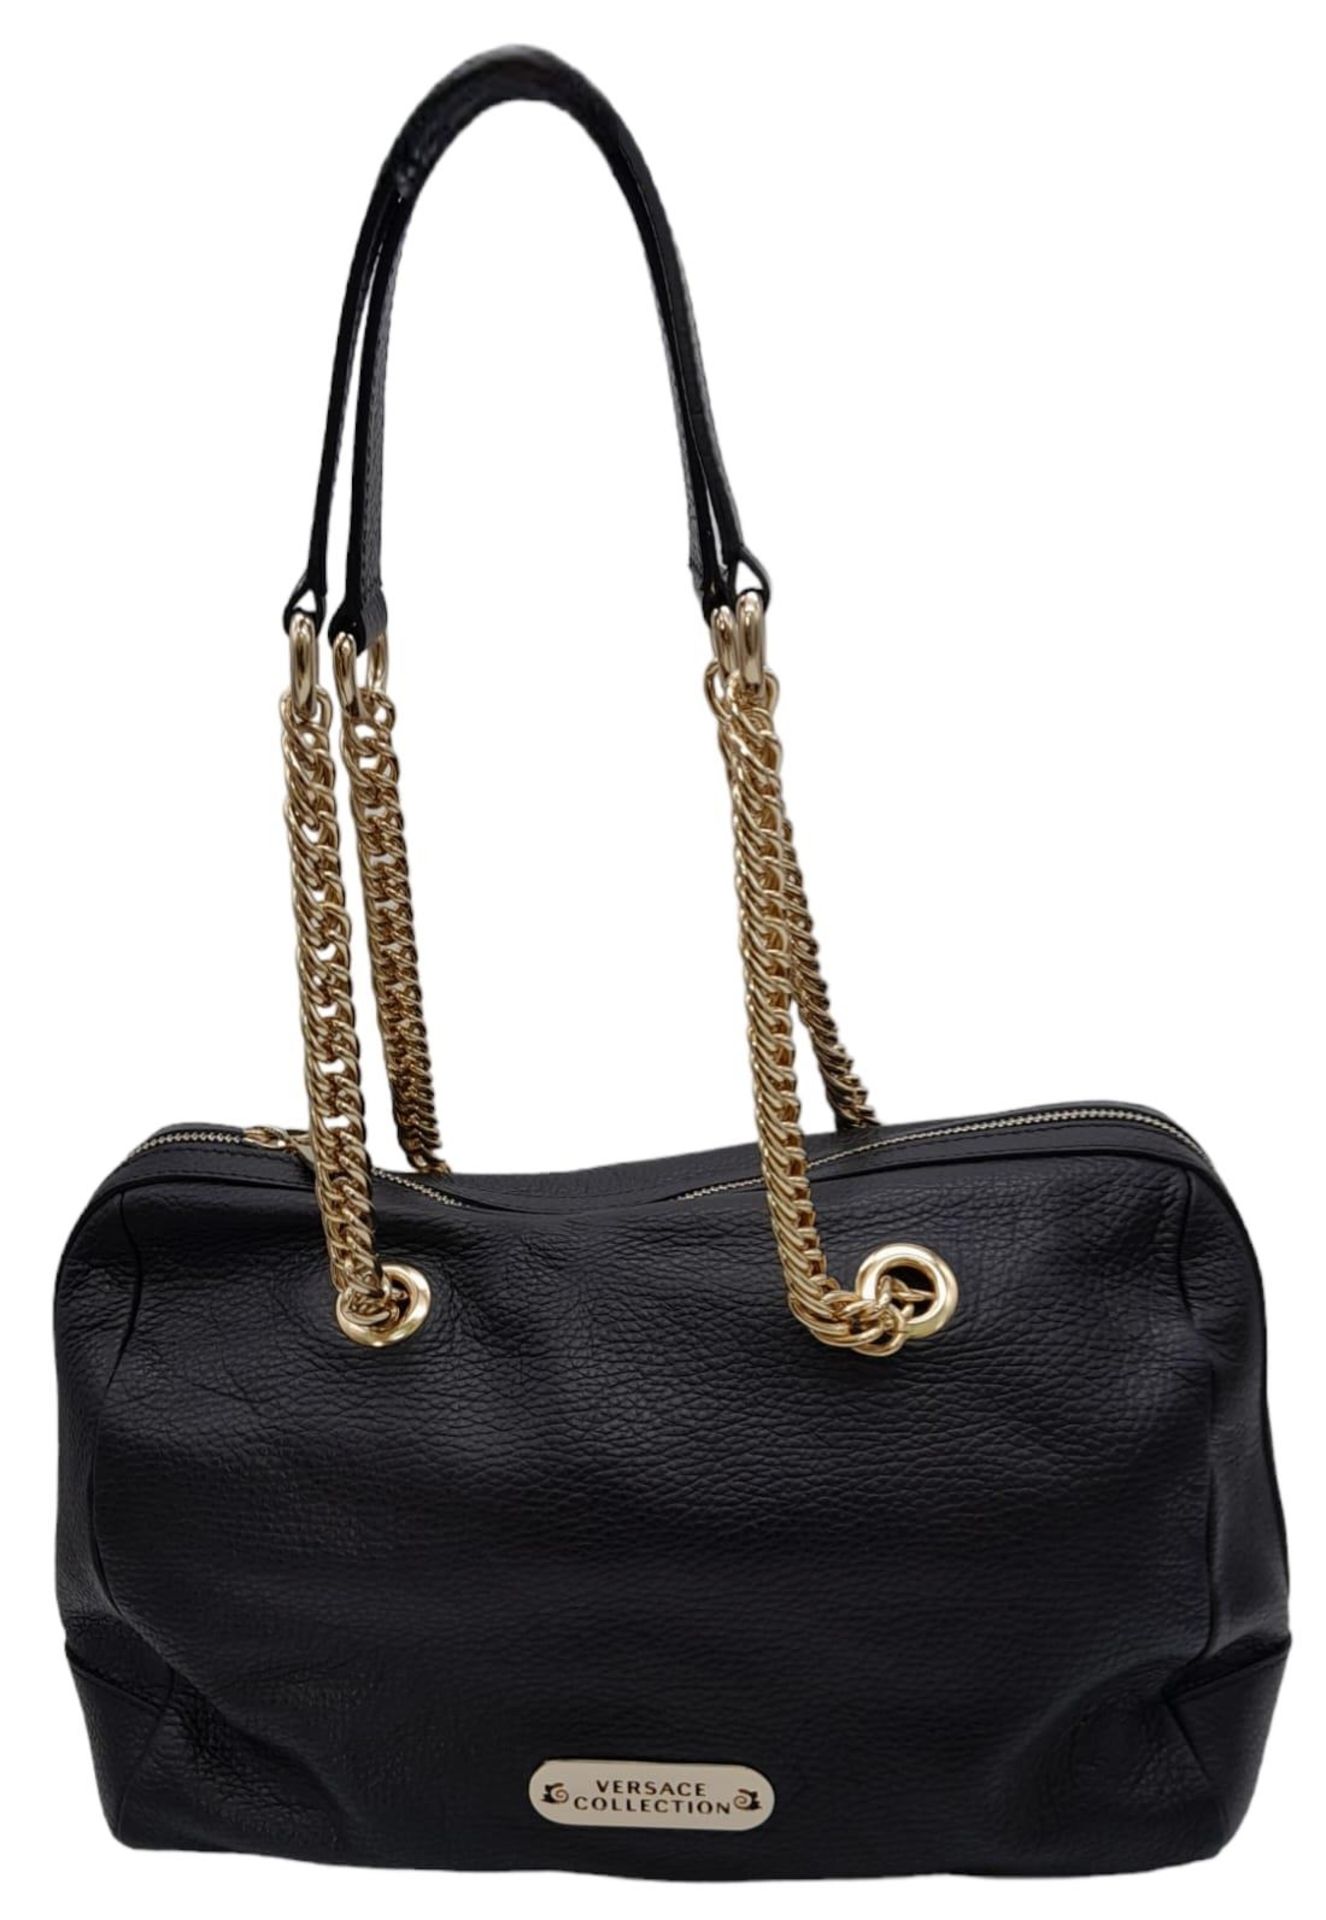 A Versace Collection Black Textured Leather Handbag. Black leather exterior with gilded main zip.